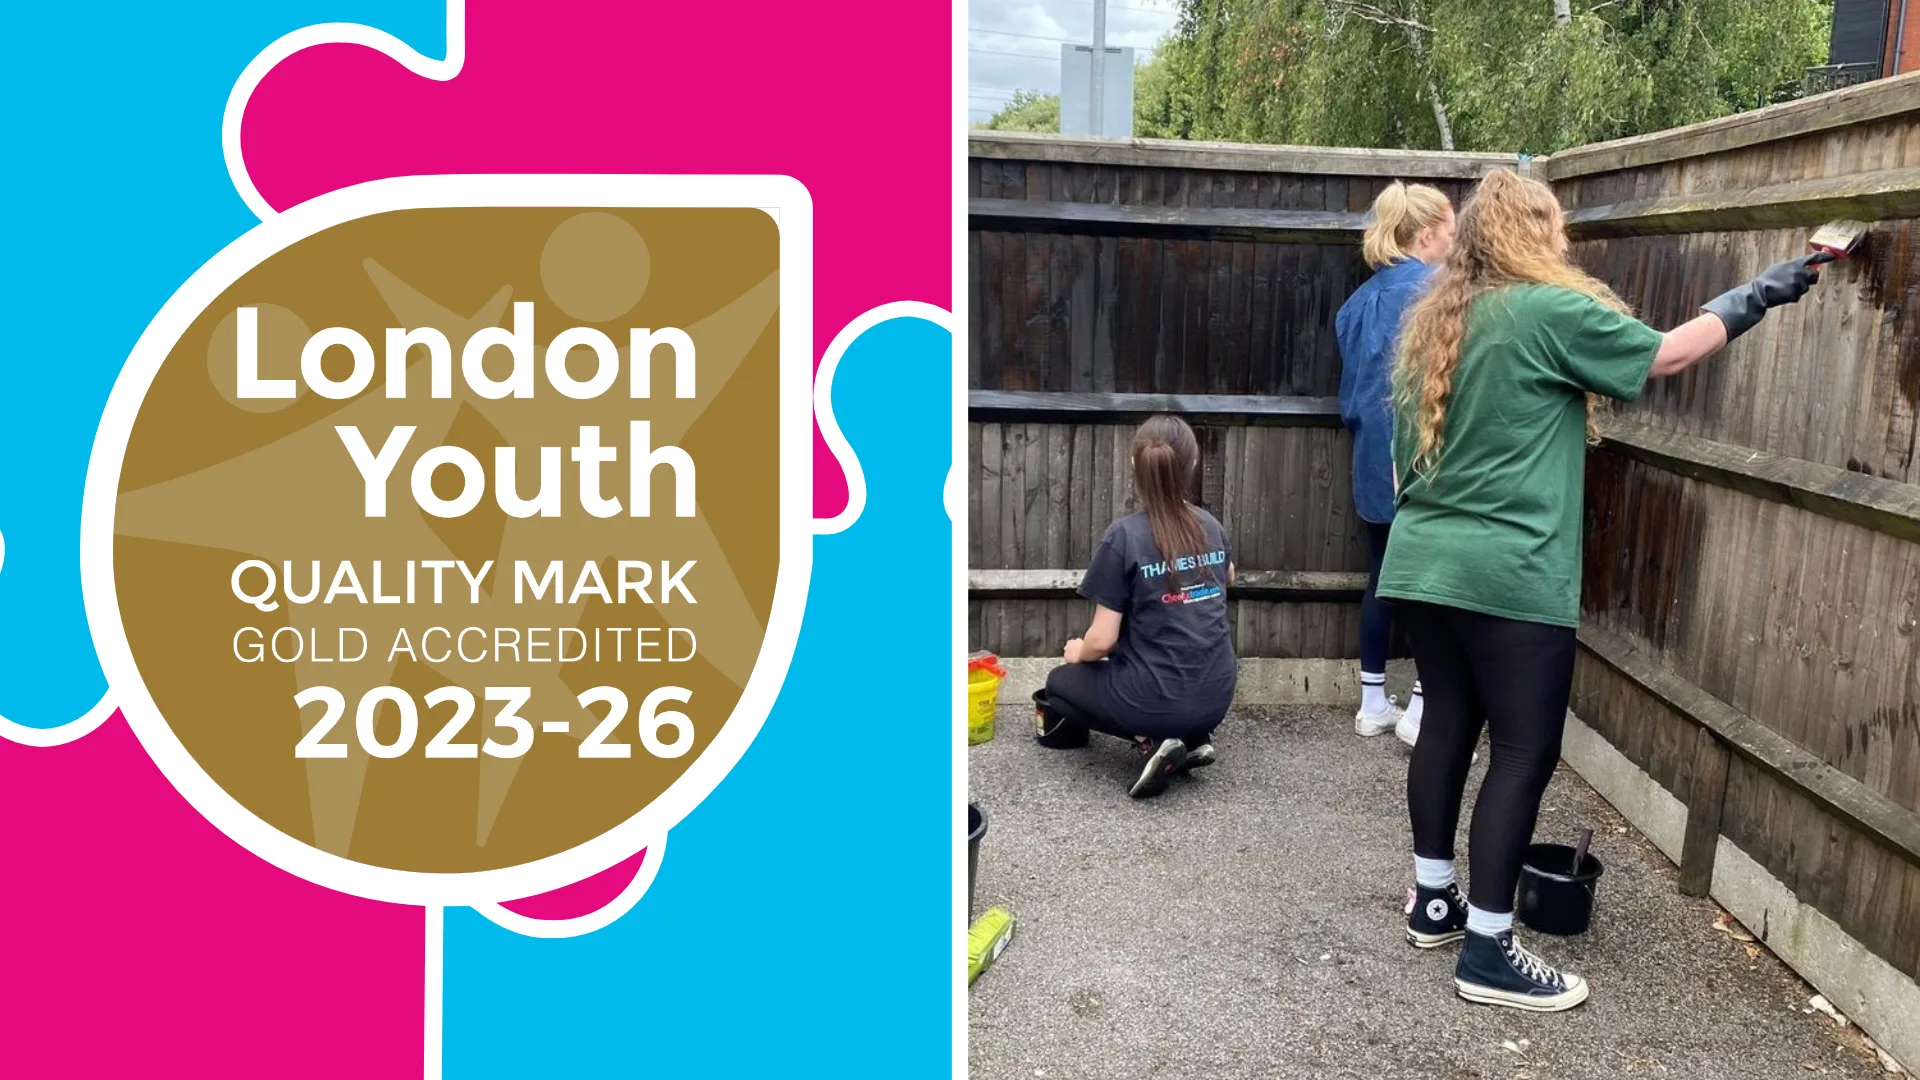 We are London Youth Gold and KFH Volunteers painting day